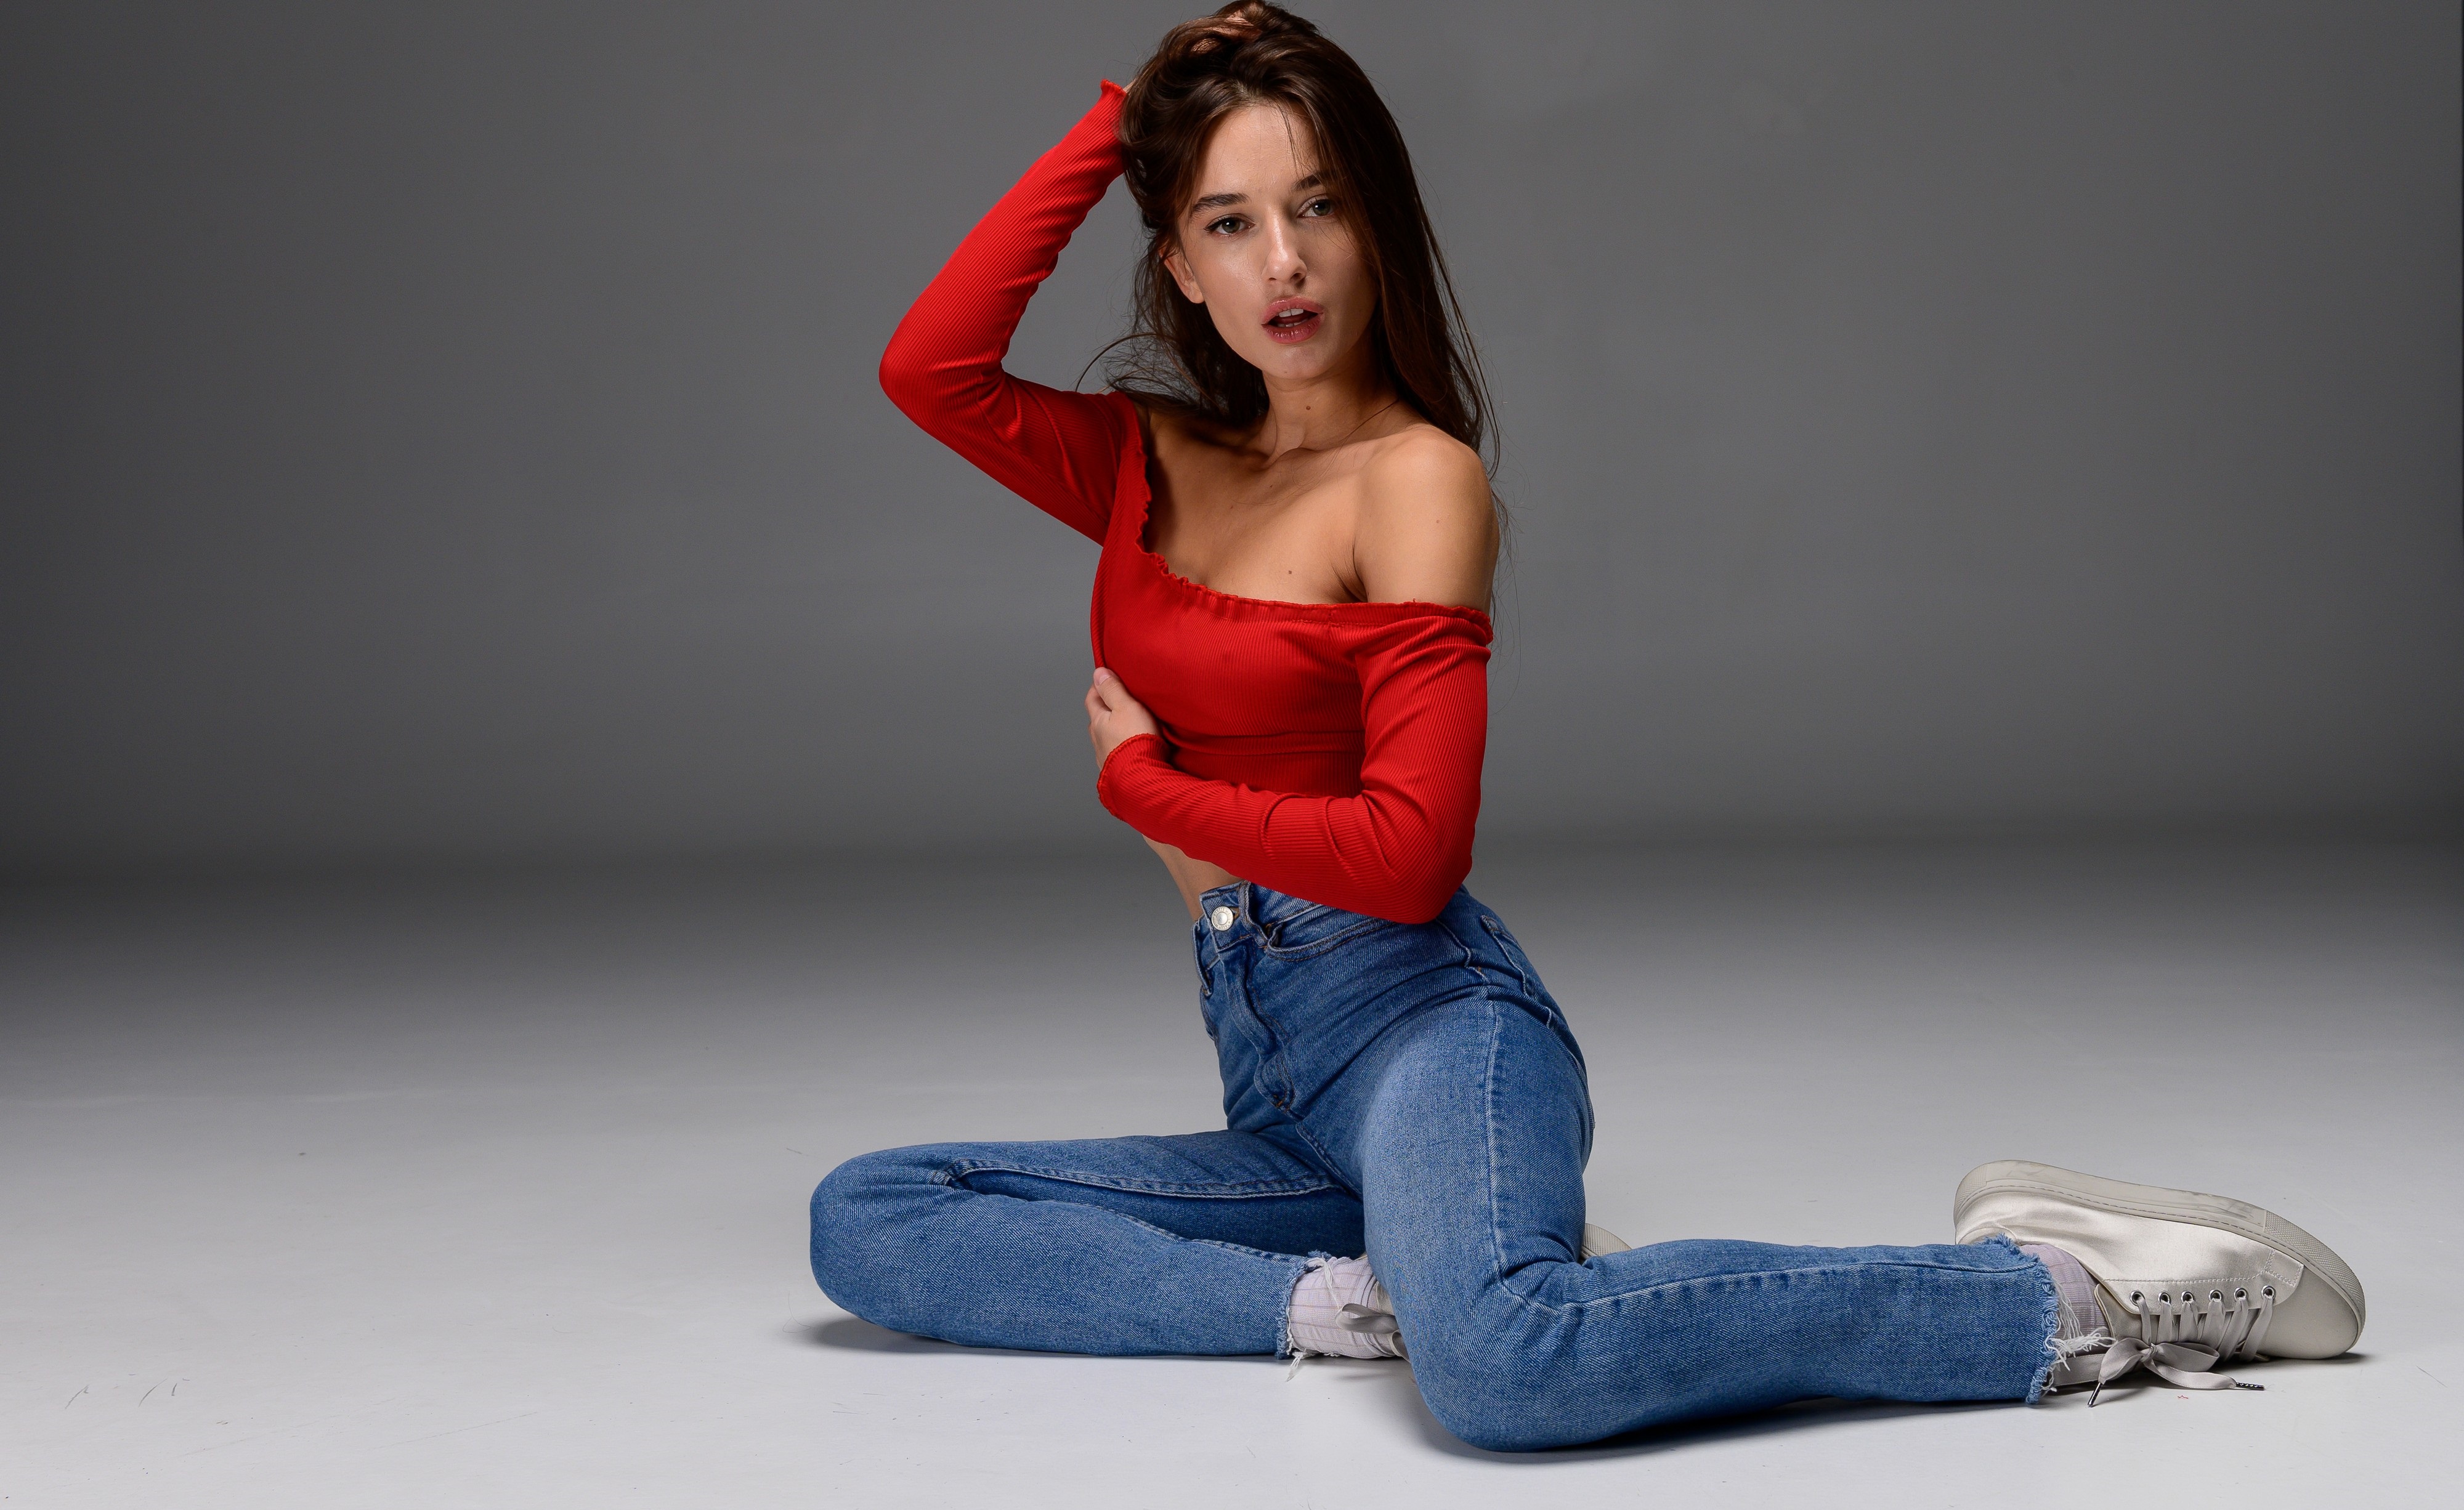 Women Model Red Lipstick Hands In Hair Red T Shirt Jeans Shoes Sitting On The Floor Open Mouth Studi 4000x2452